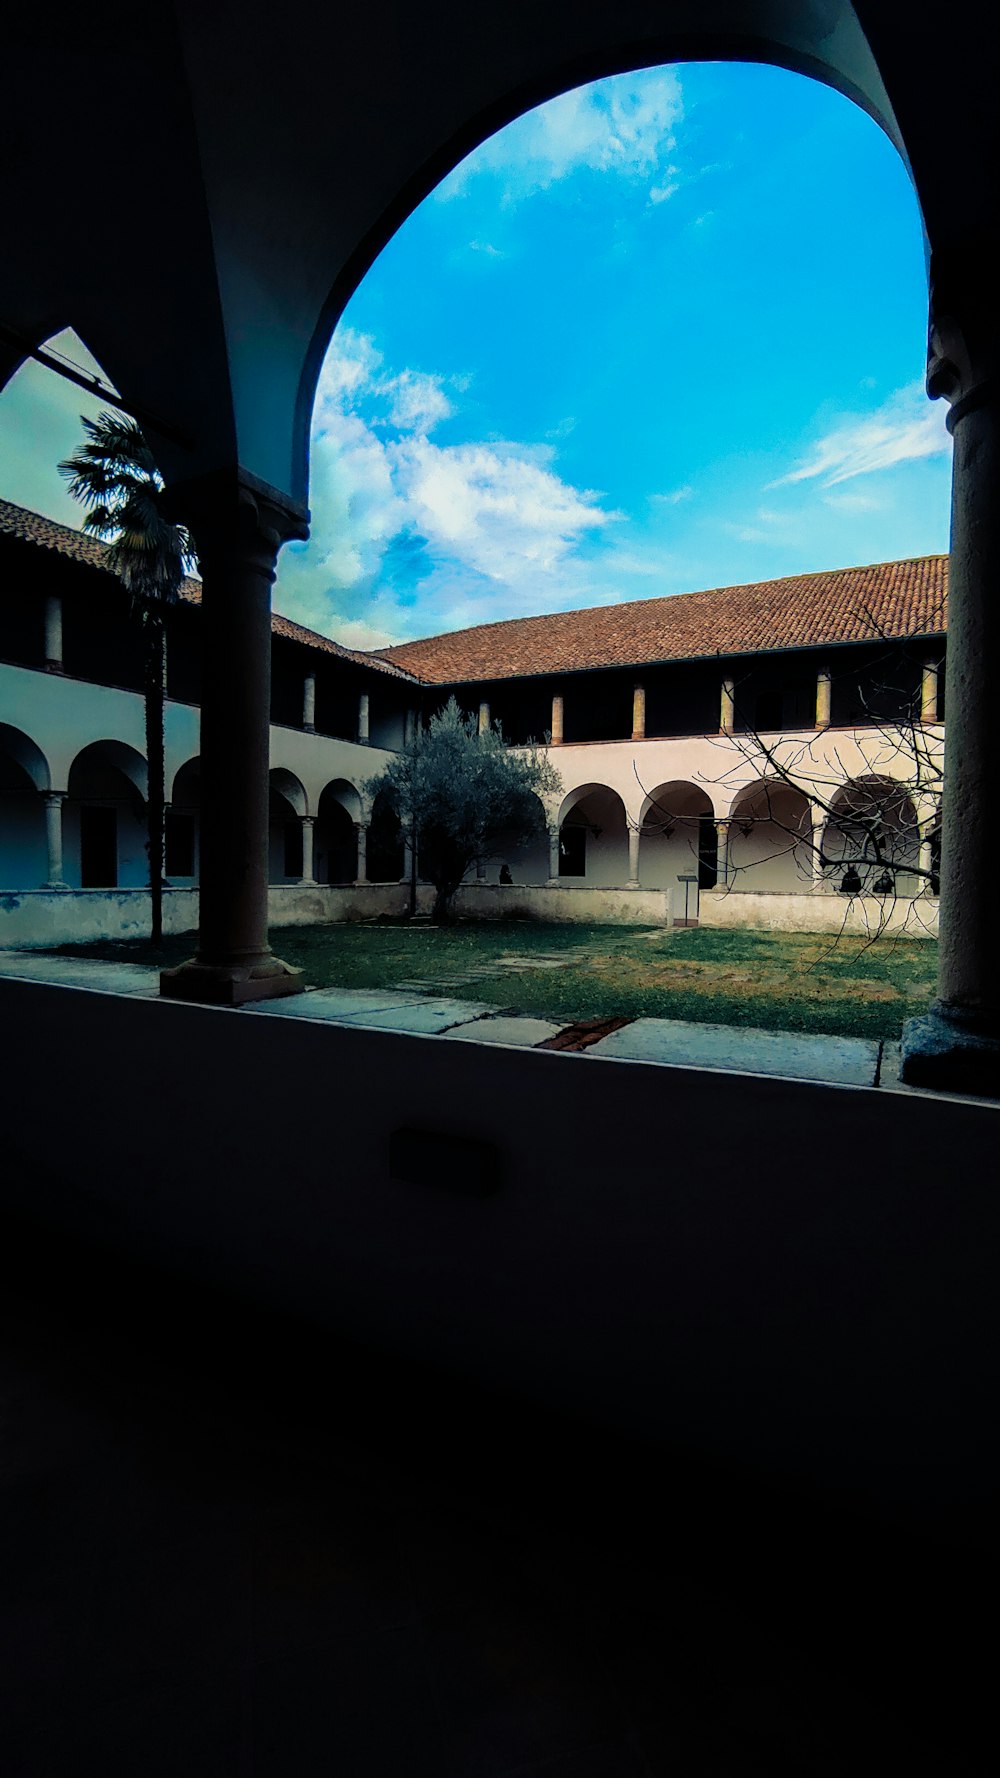 a view of a courtyard through an archway